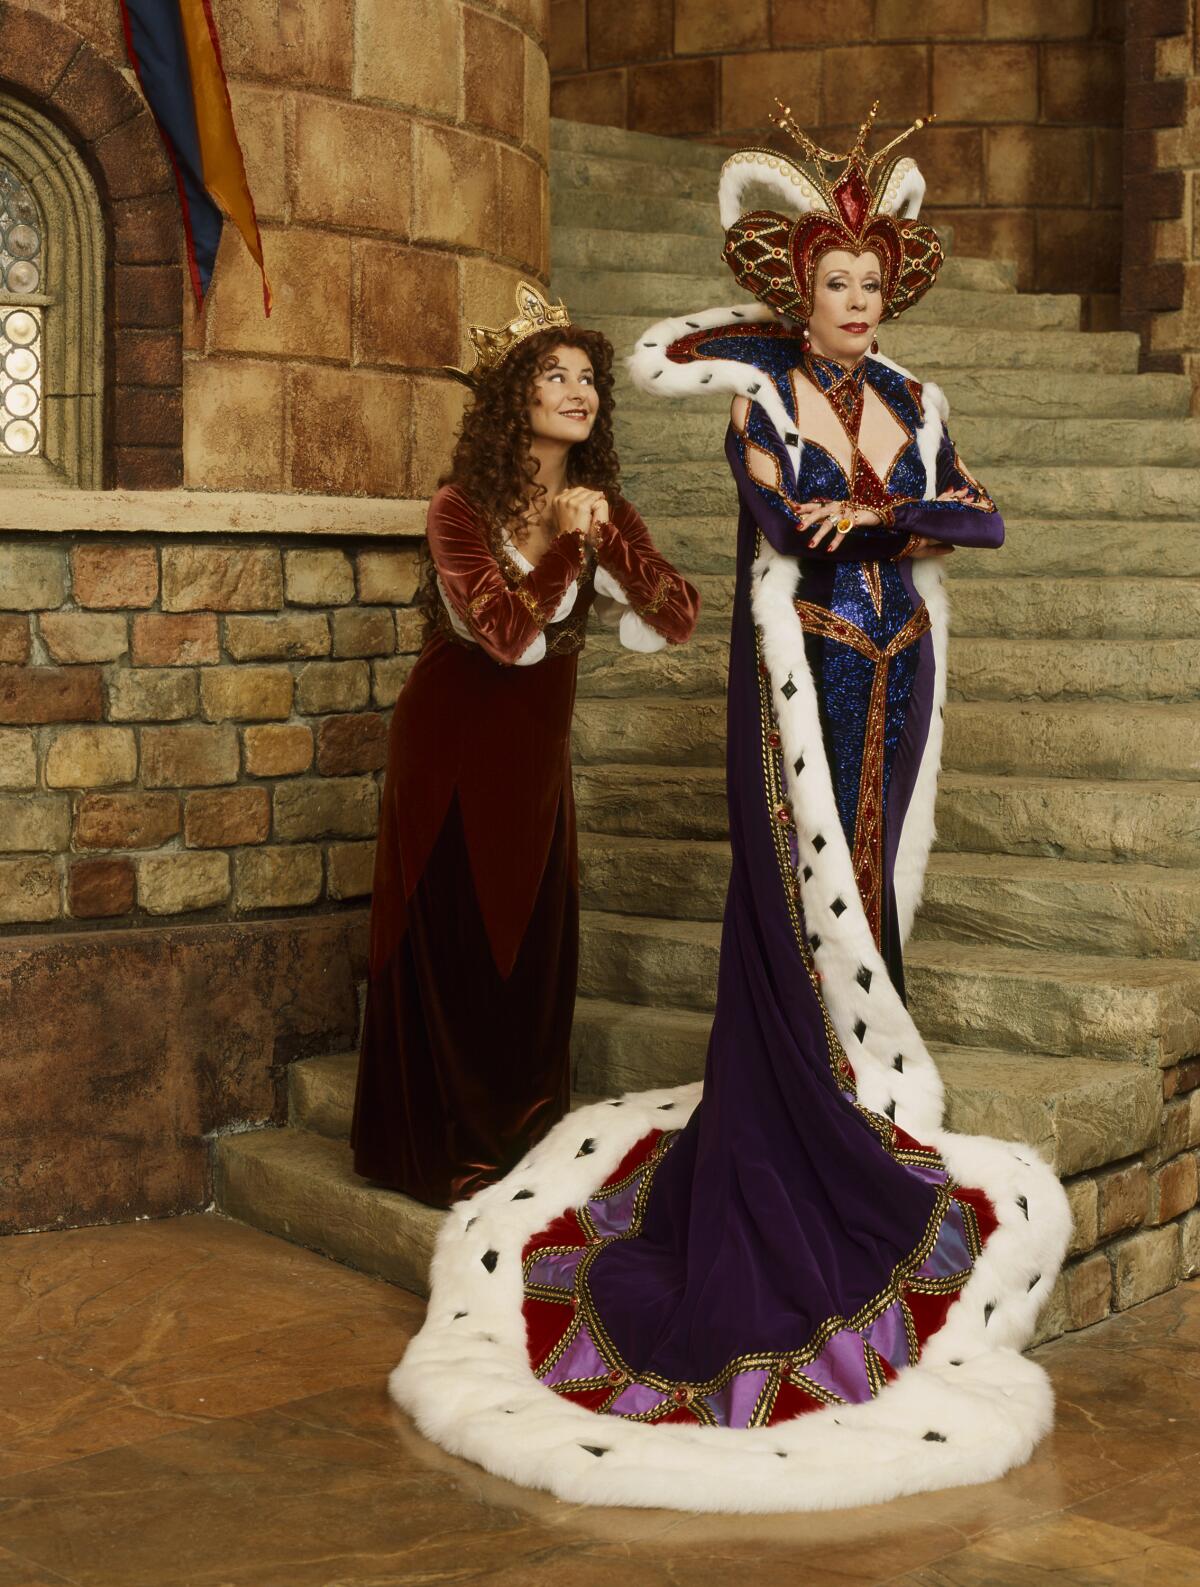 A princess and queen stand on a staircase.